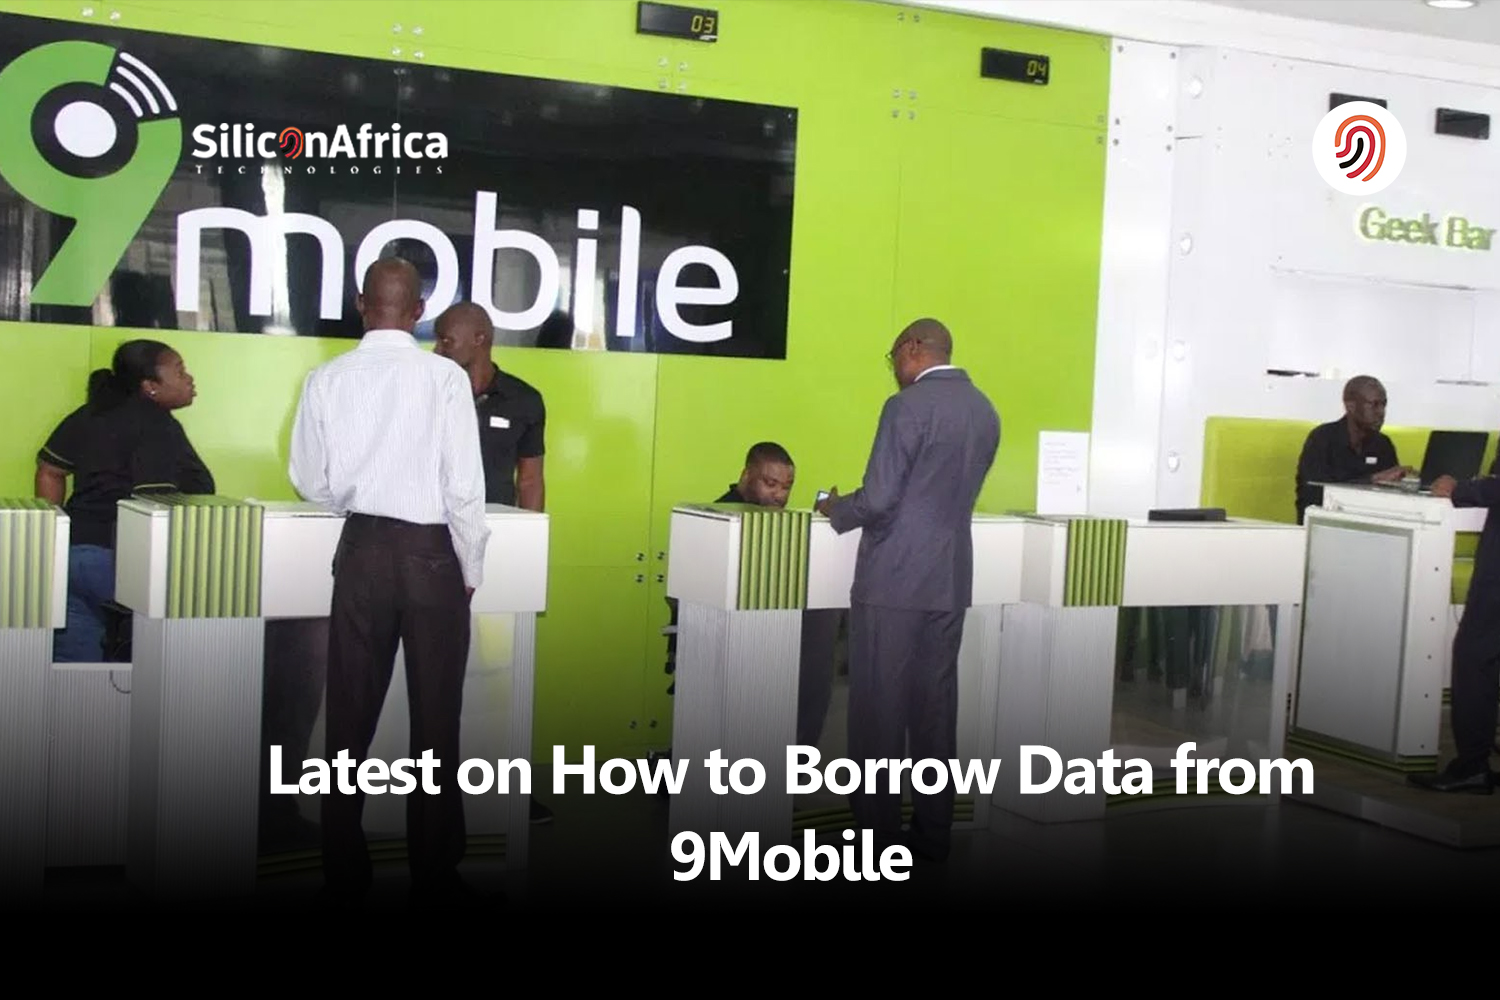 borrow data from 9mobile